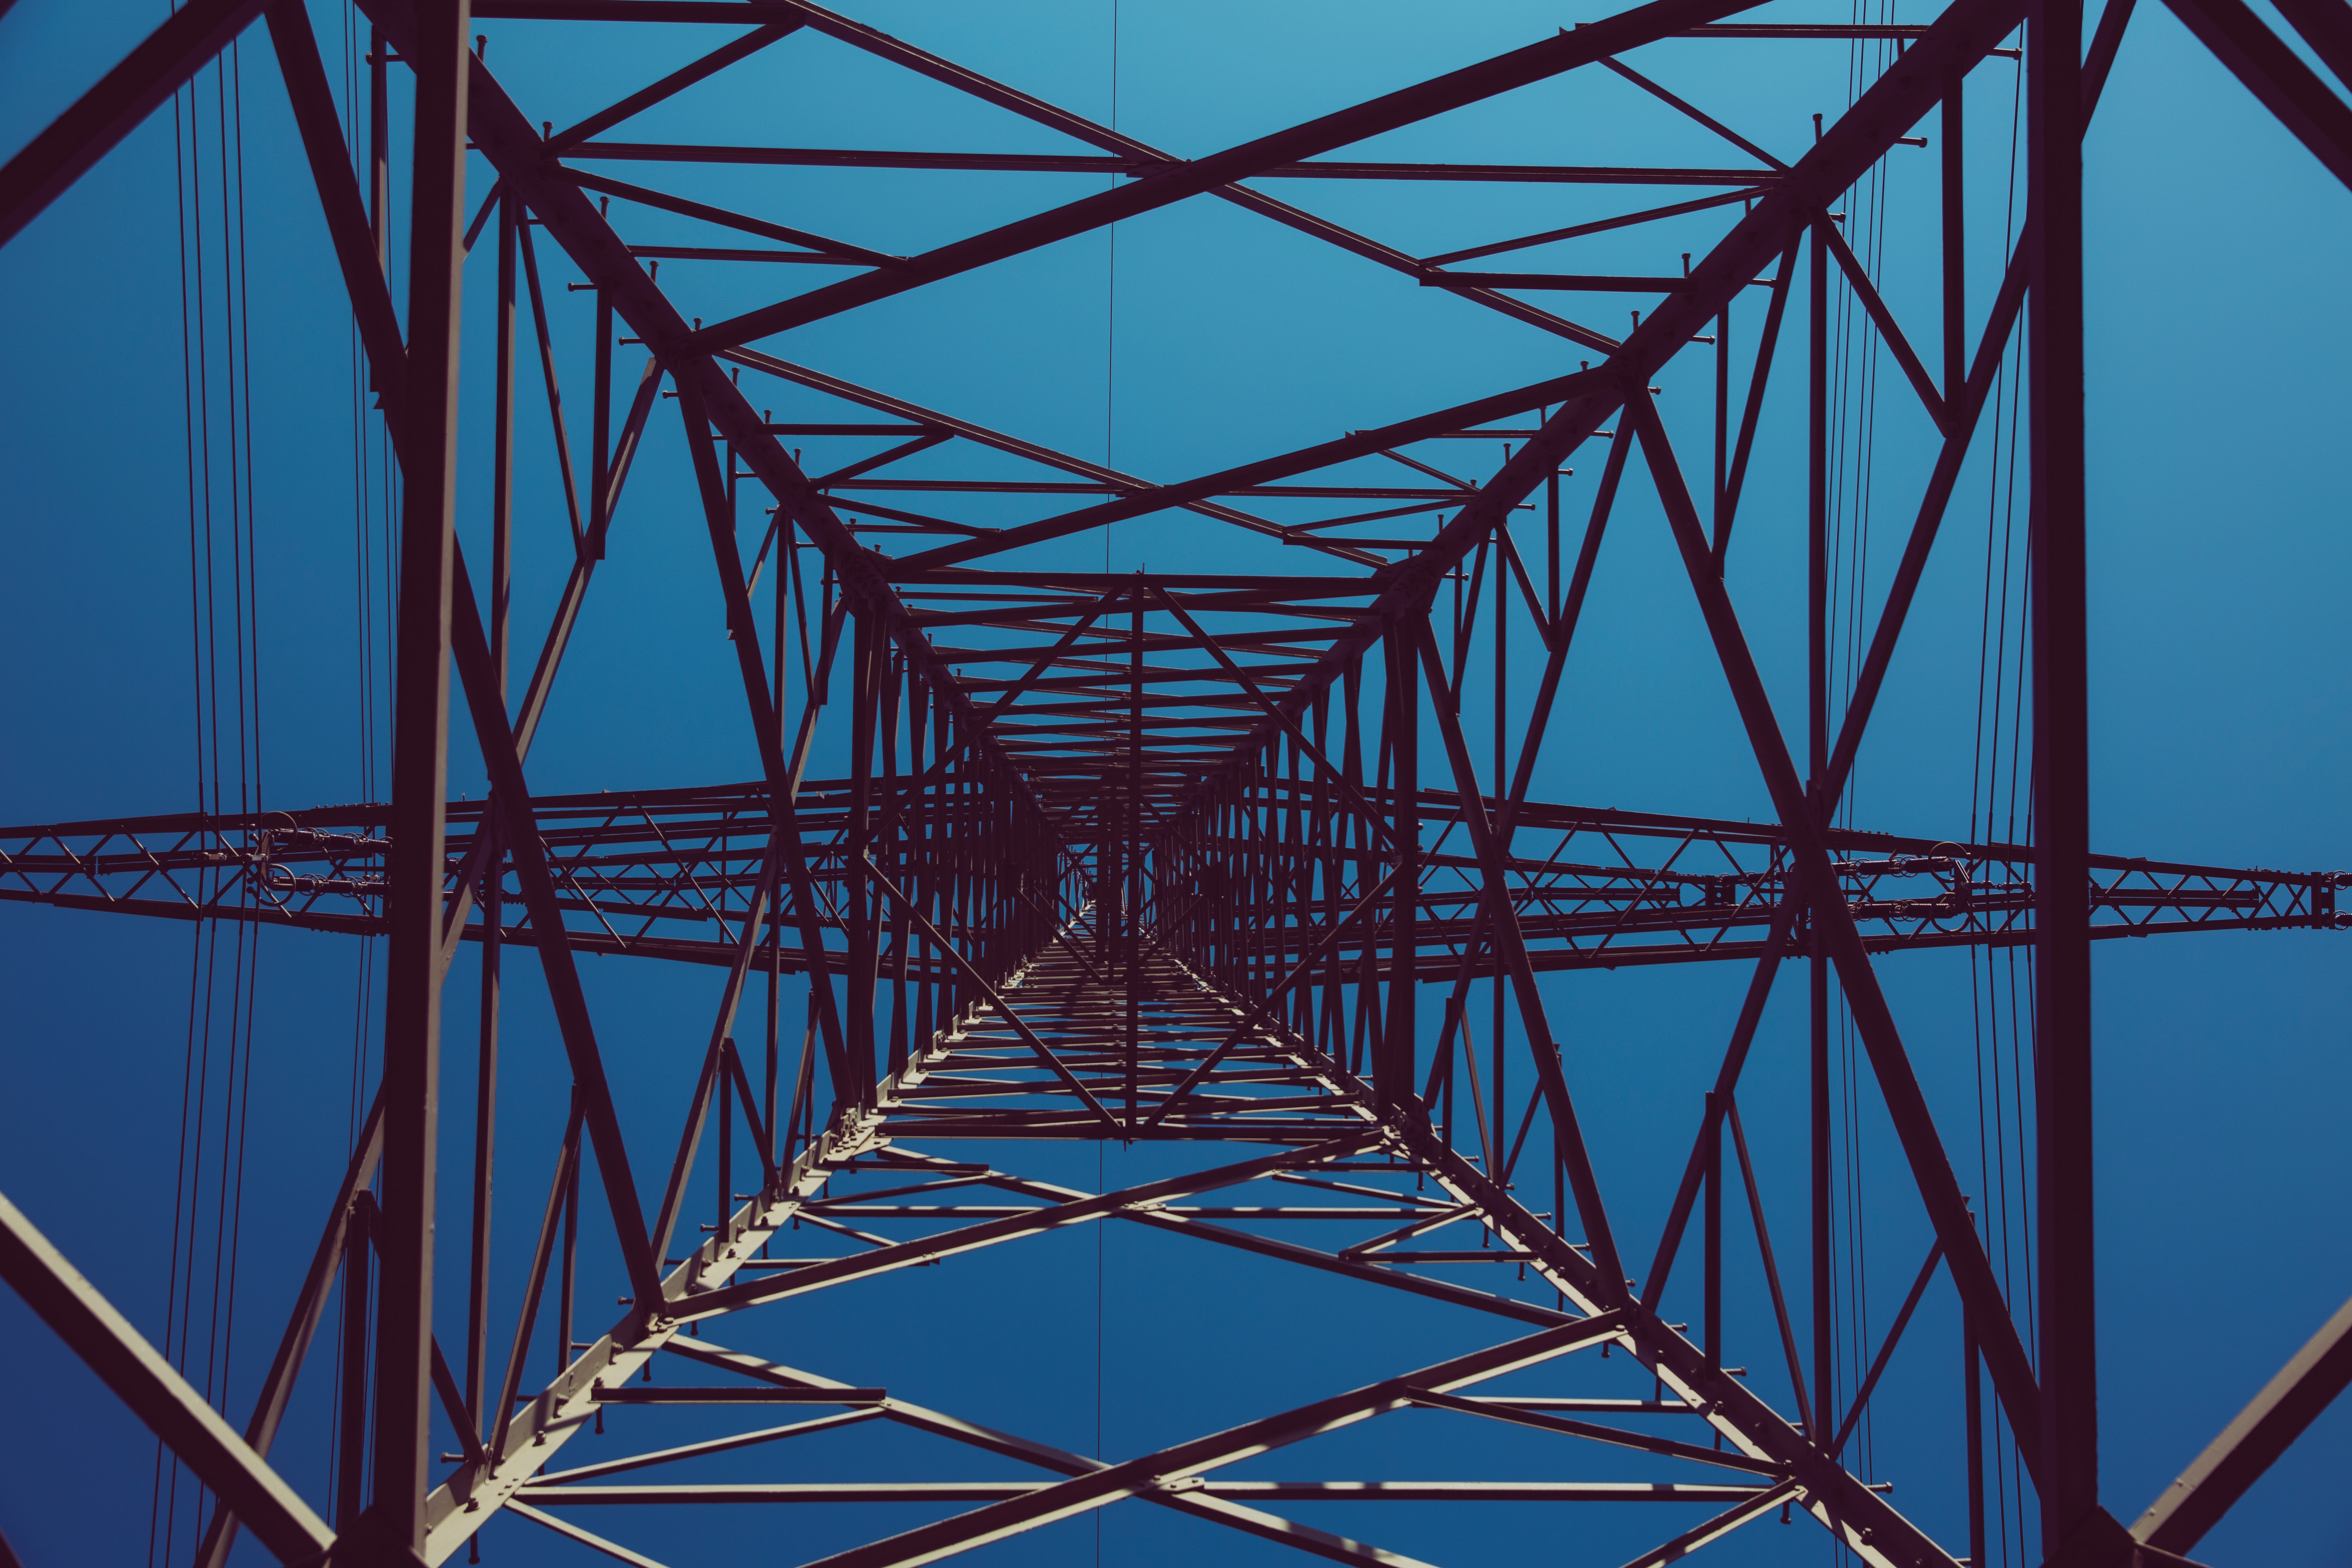 electricity tower